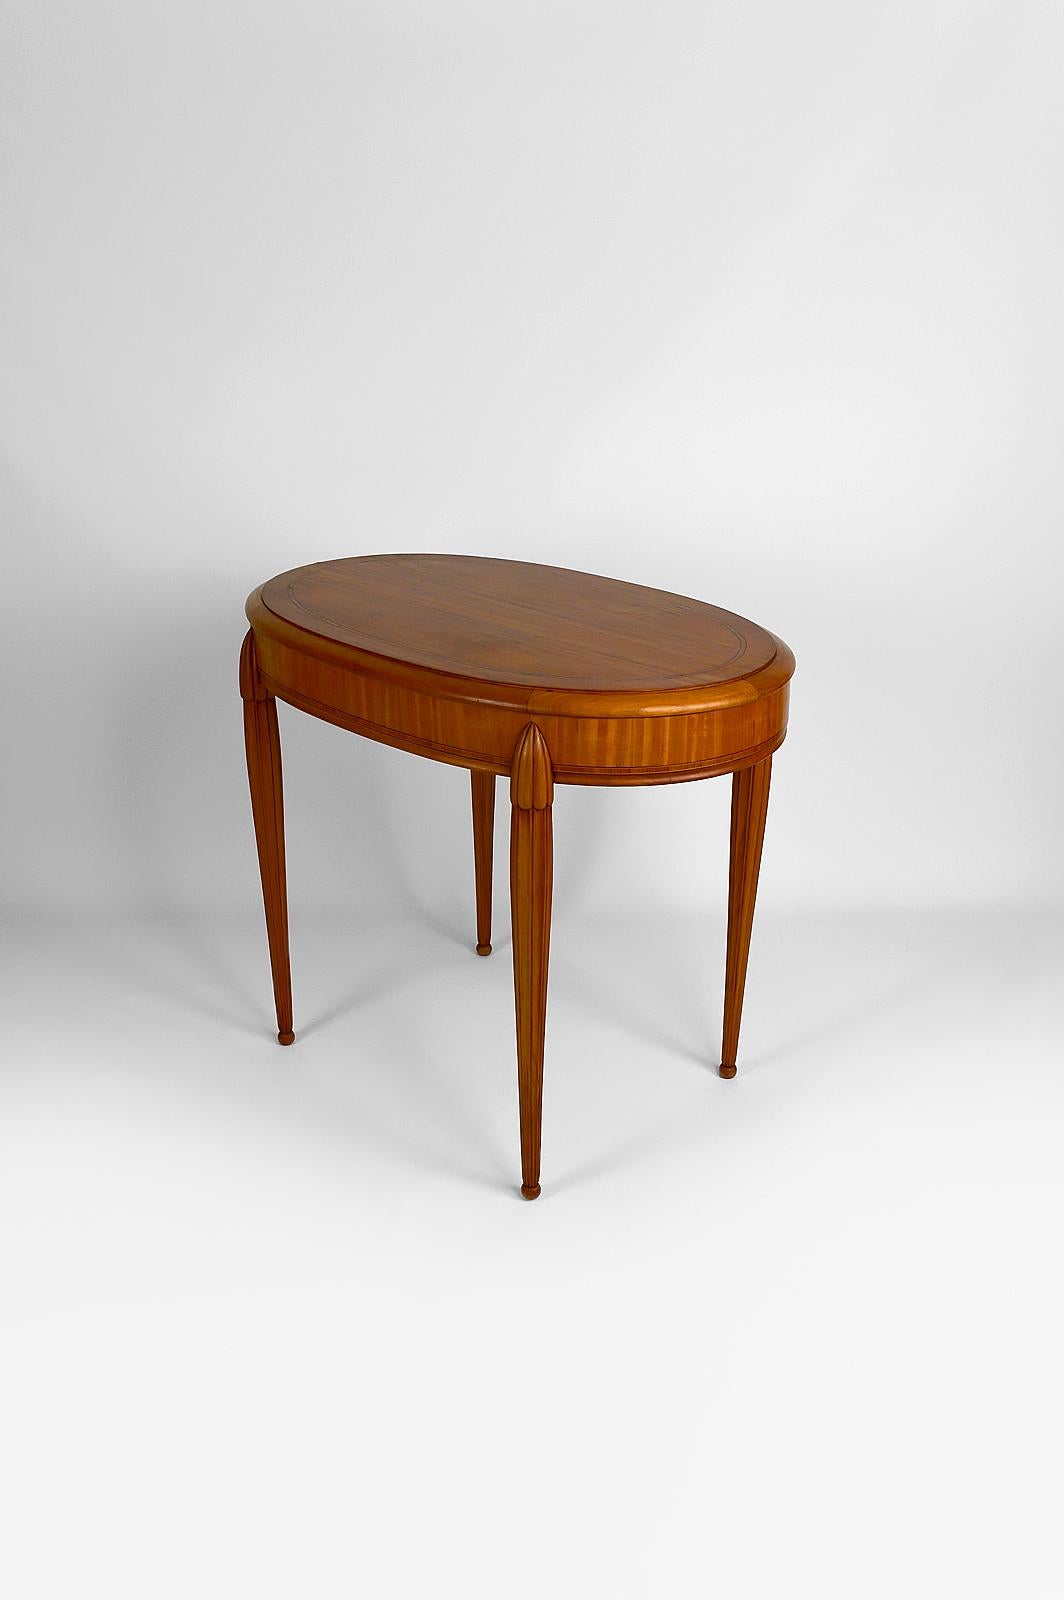 Early 20th Century Art Deco Oval Pedestal Table with Marquetry, France, circa 1920